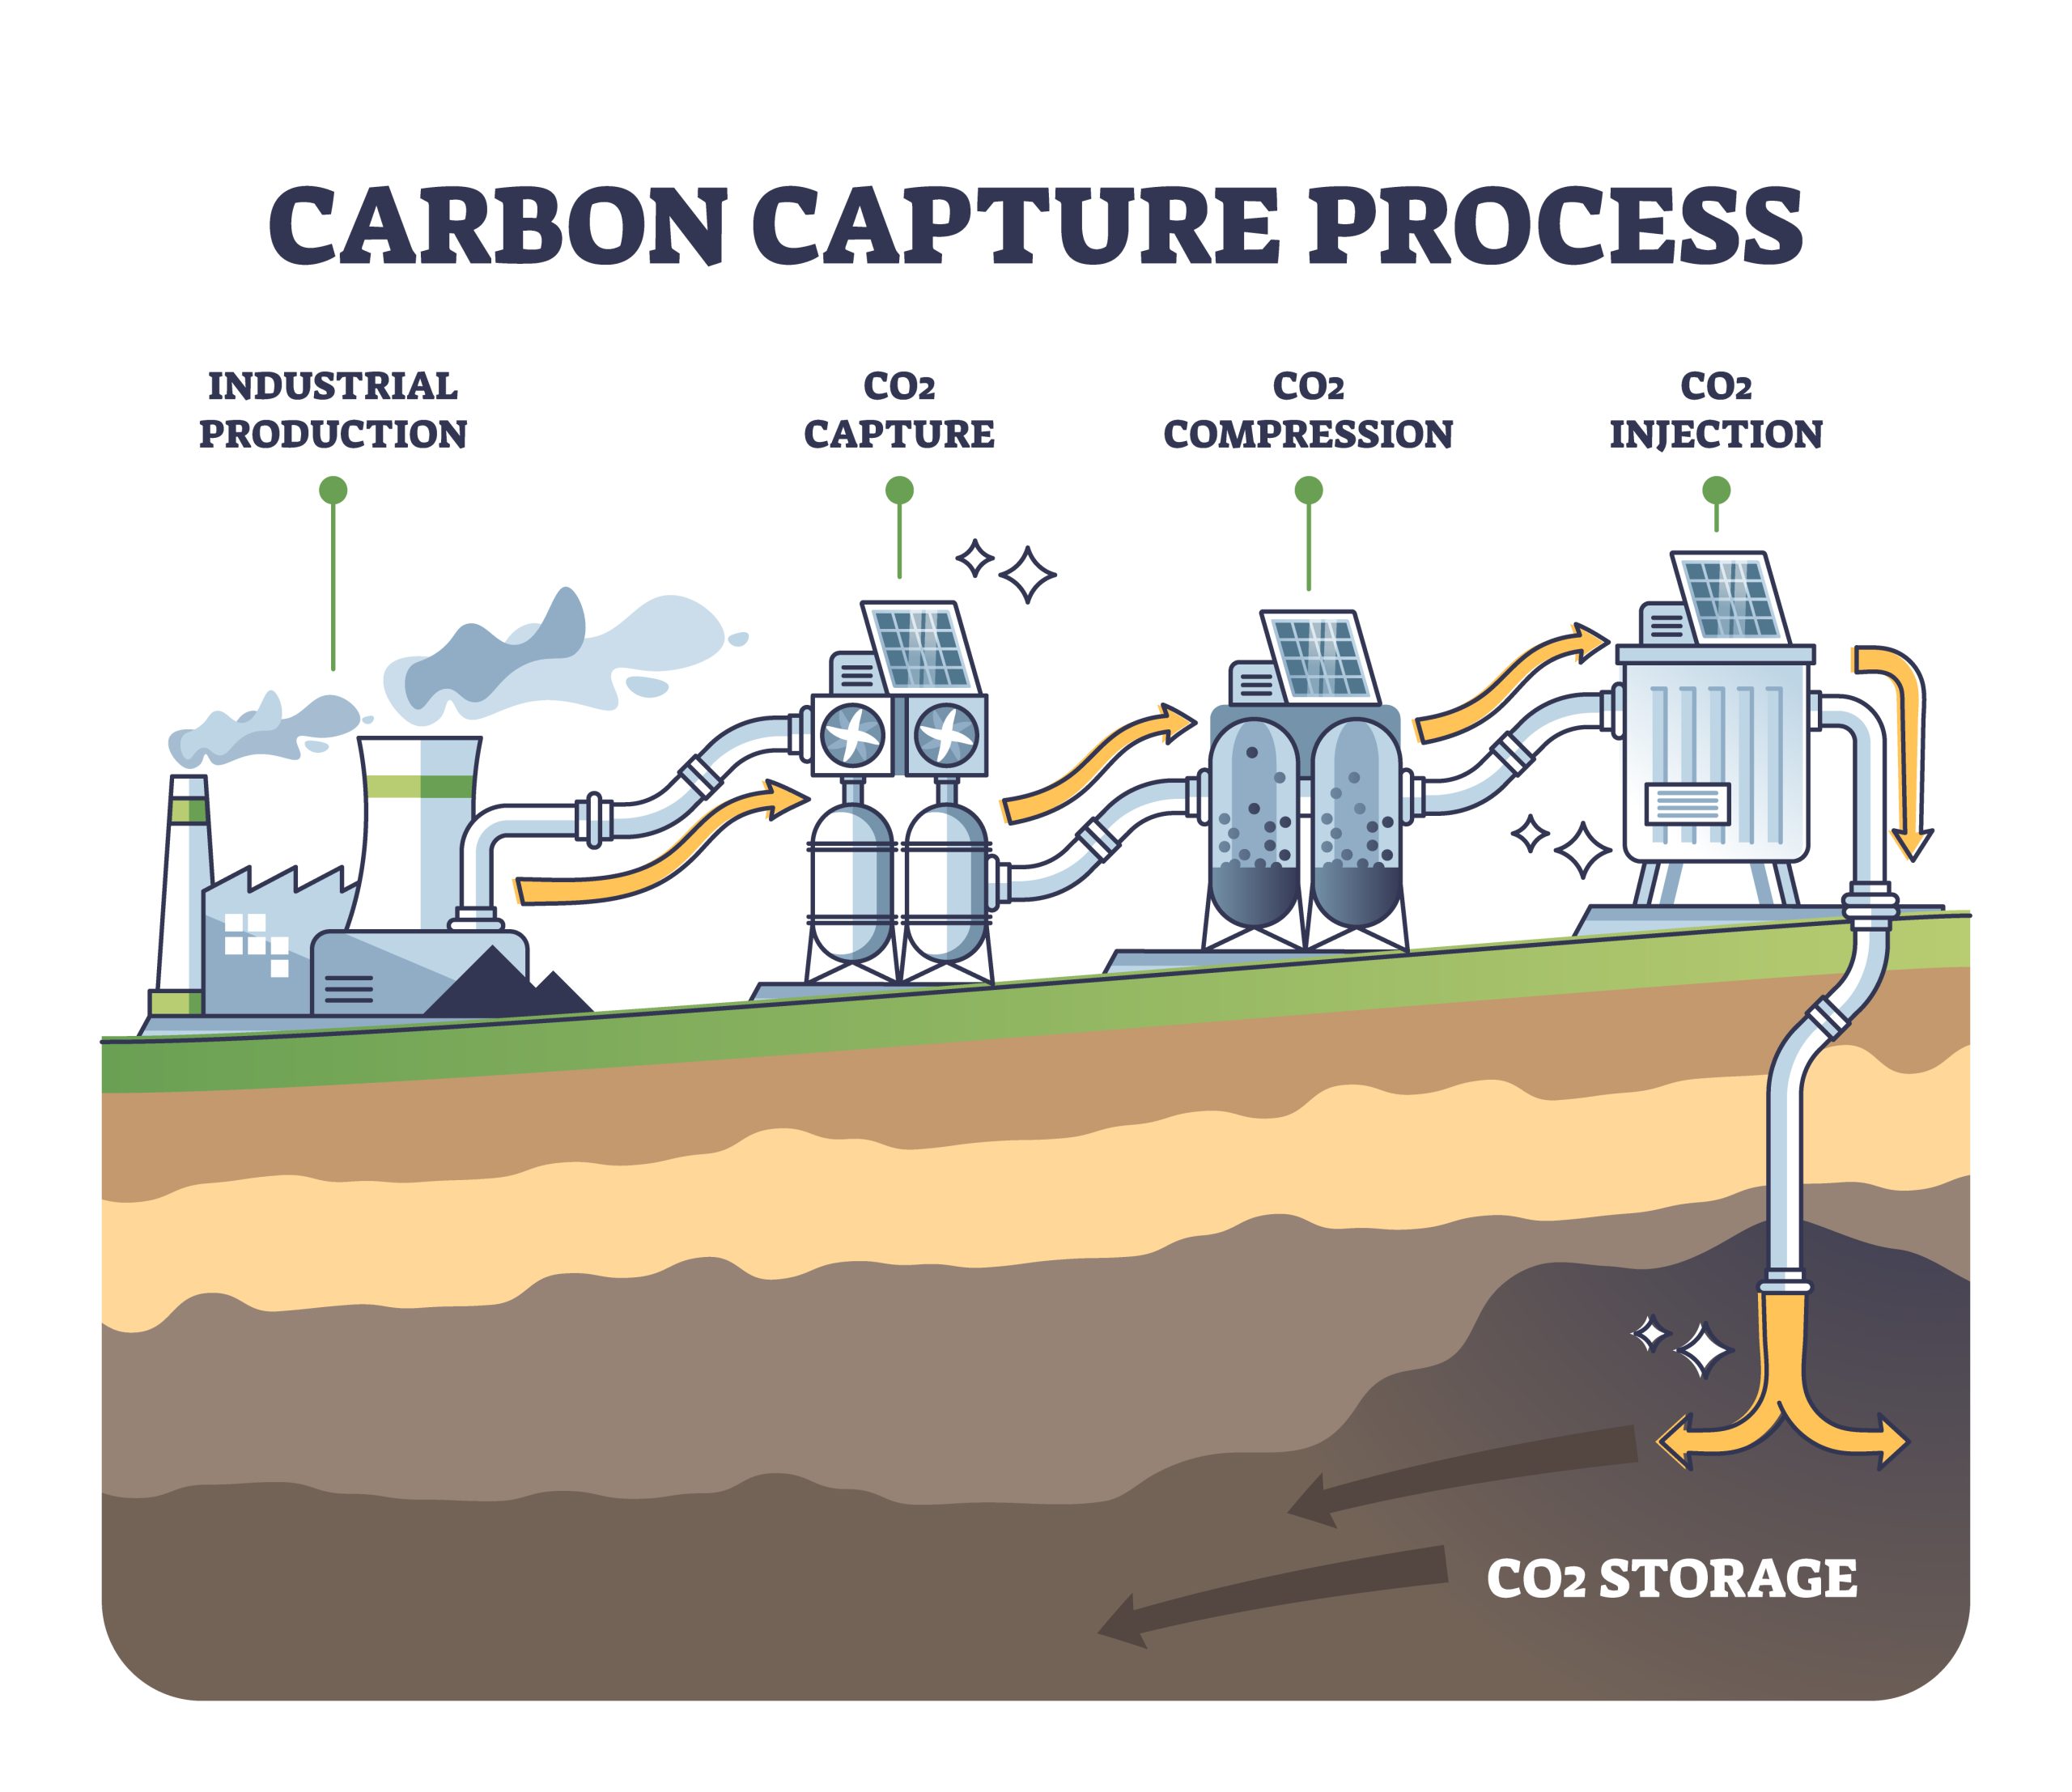 Carbon capture process stages with CO2 storage 